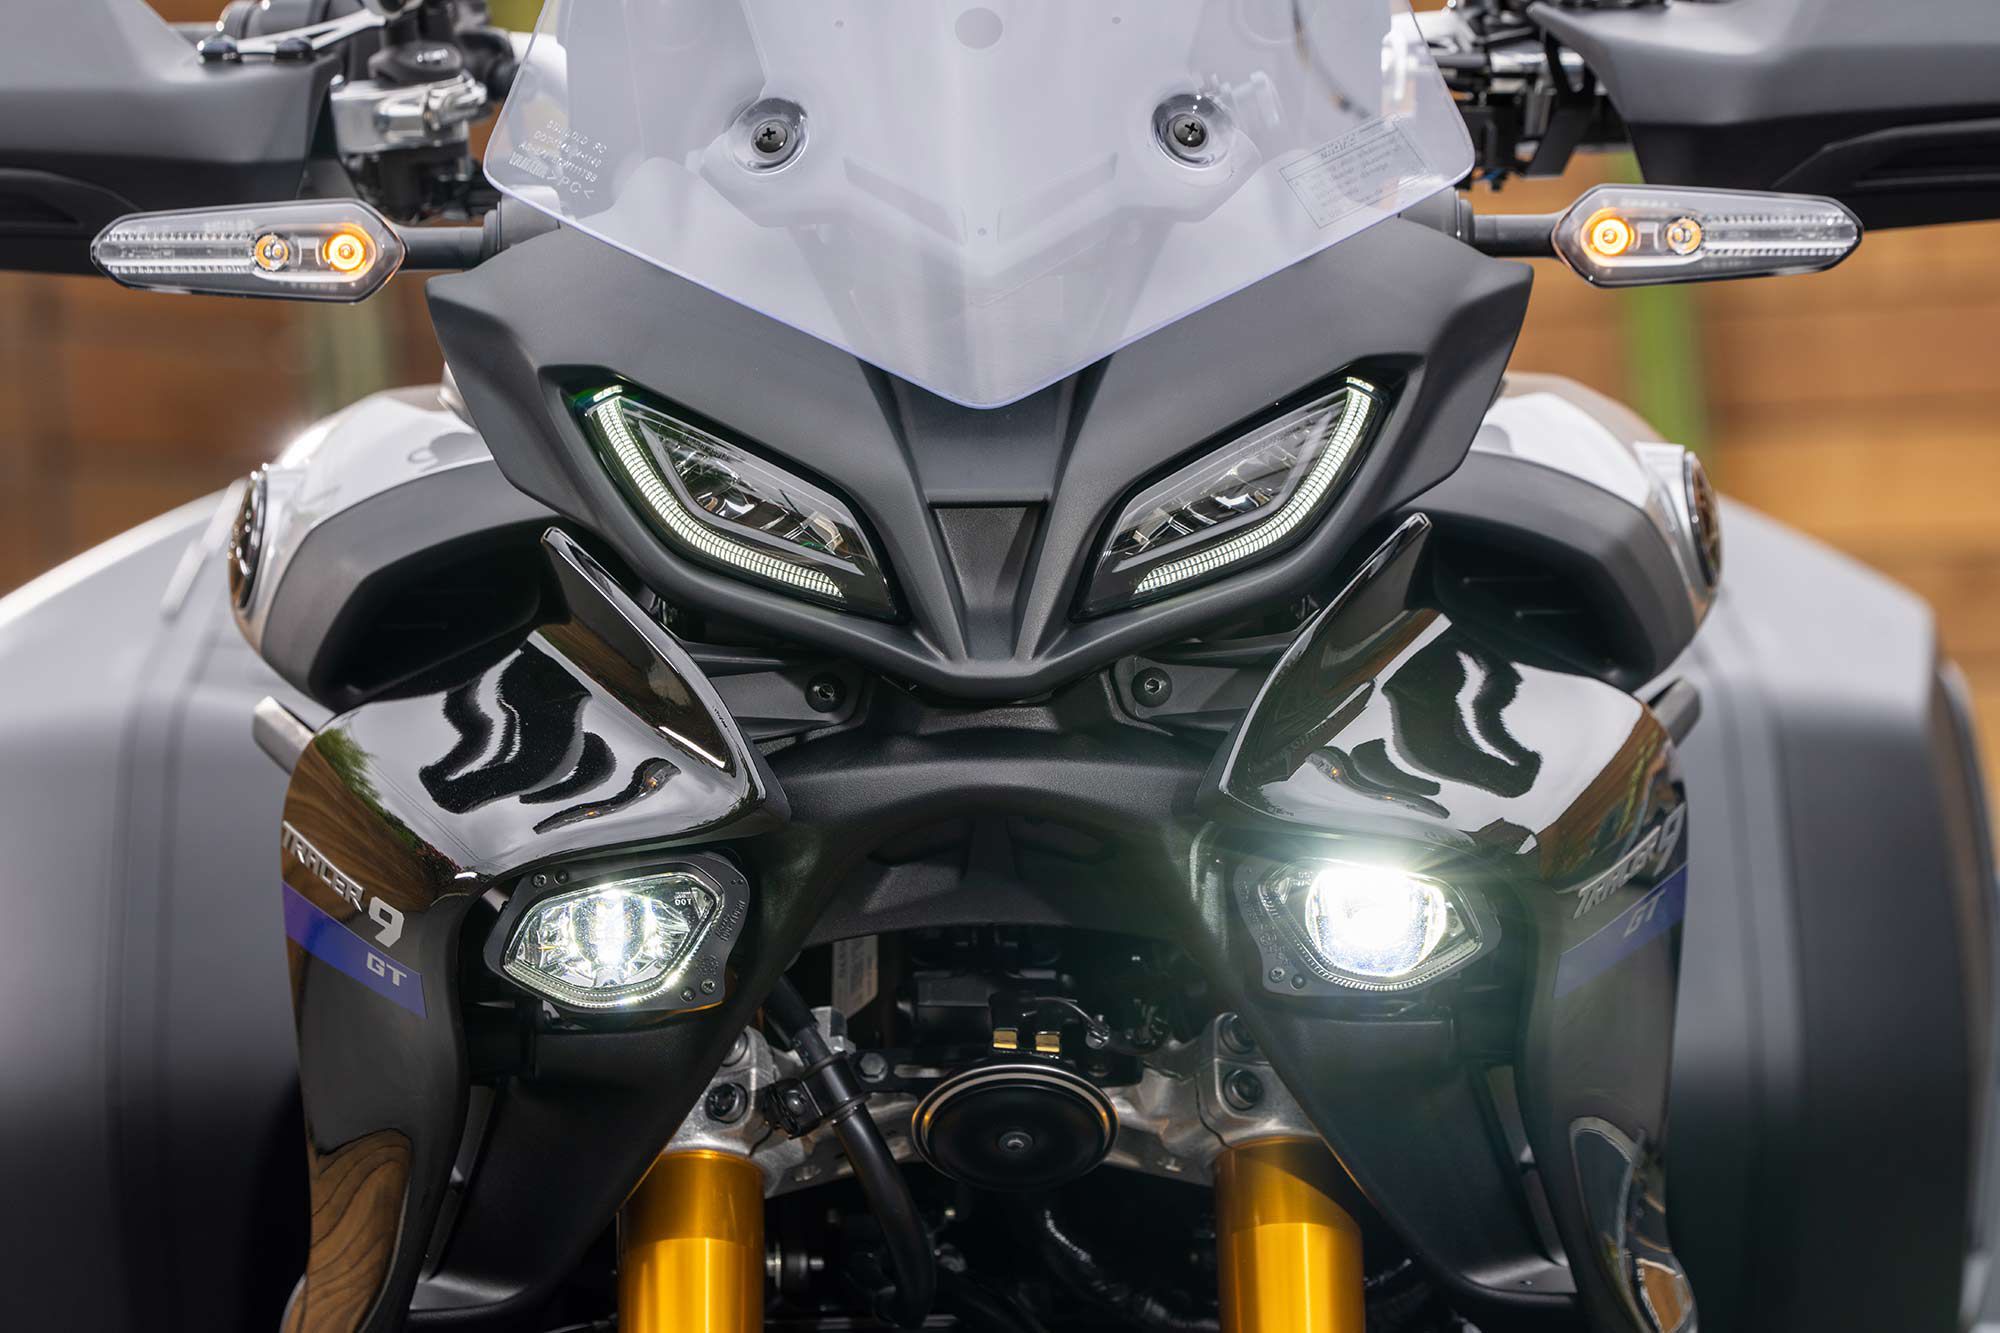 Bright LED lights help the Tracer 9 GT rider stand out after dark. Cornering headlamps are standard but could do a better job of illuminating turns at night.